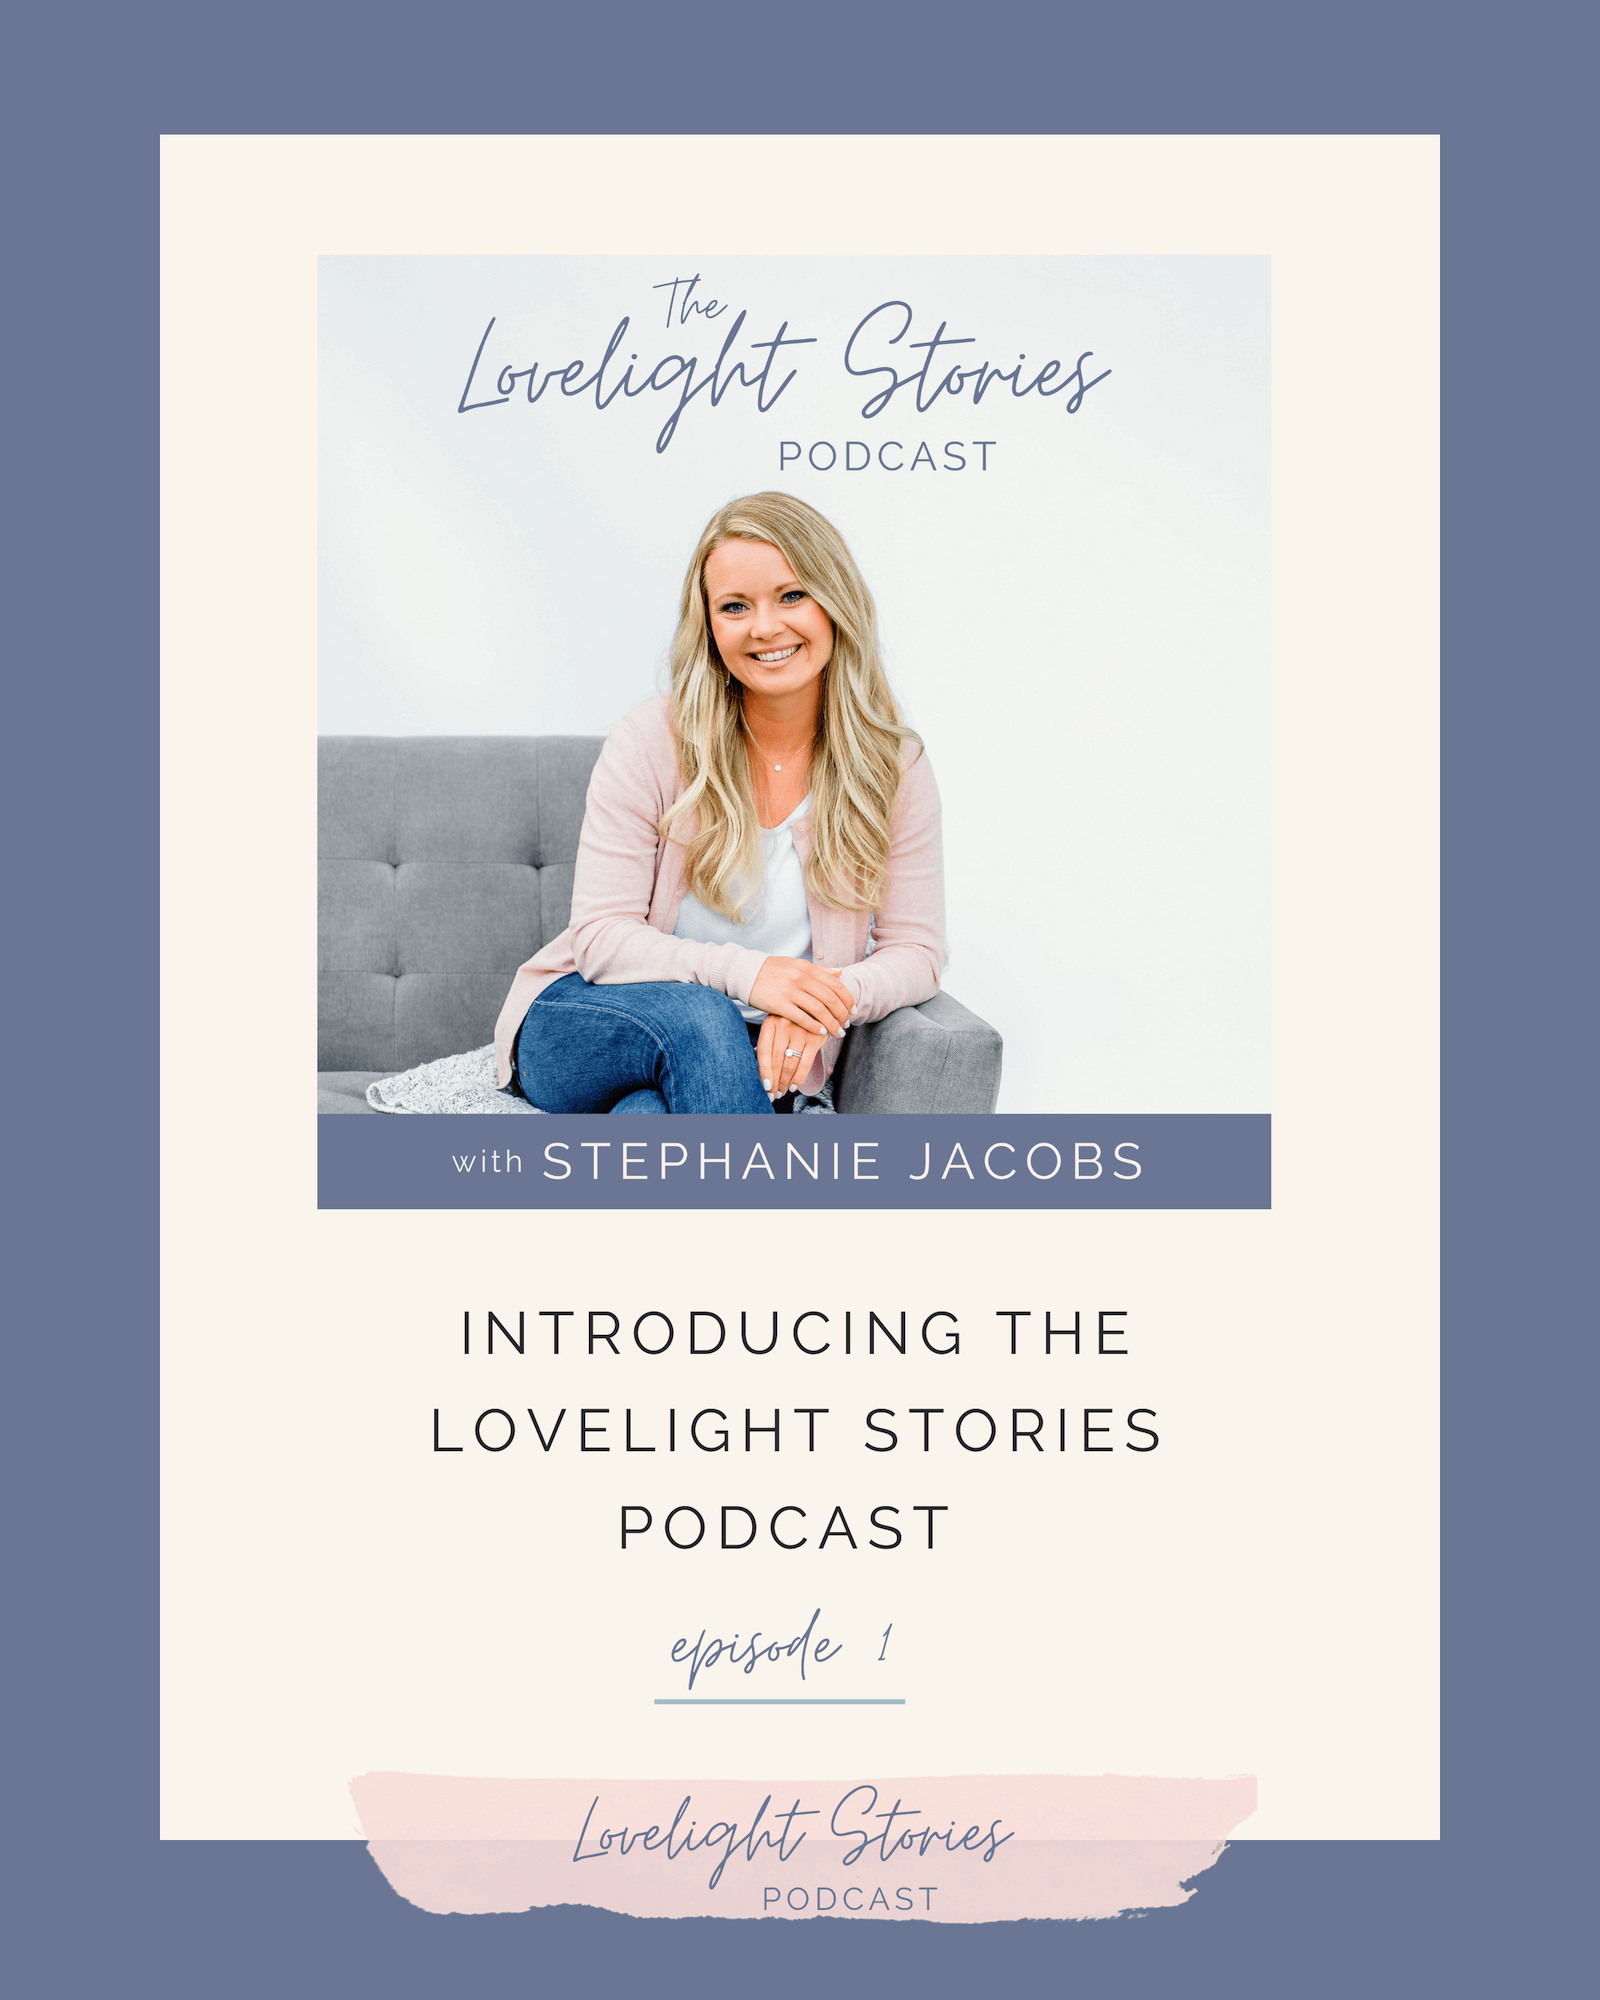 Introducing the Lovelight Stories Podcast with Stephanie Jacobs